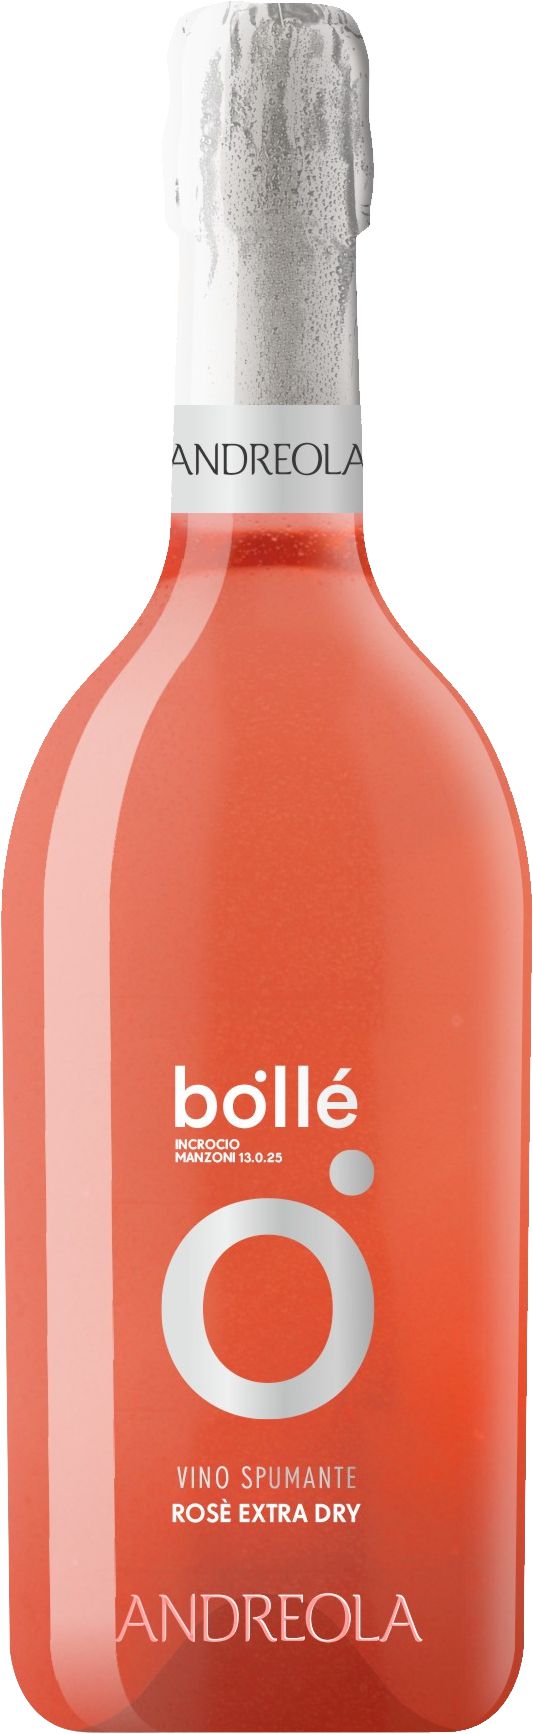 Andreola Bolle Vino Spumante Rose Extra Dry